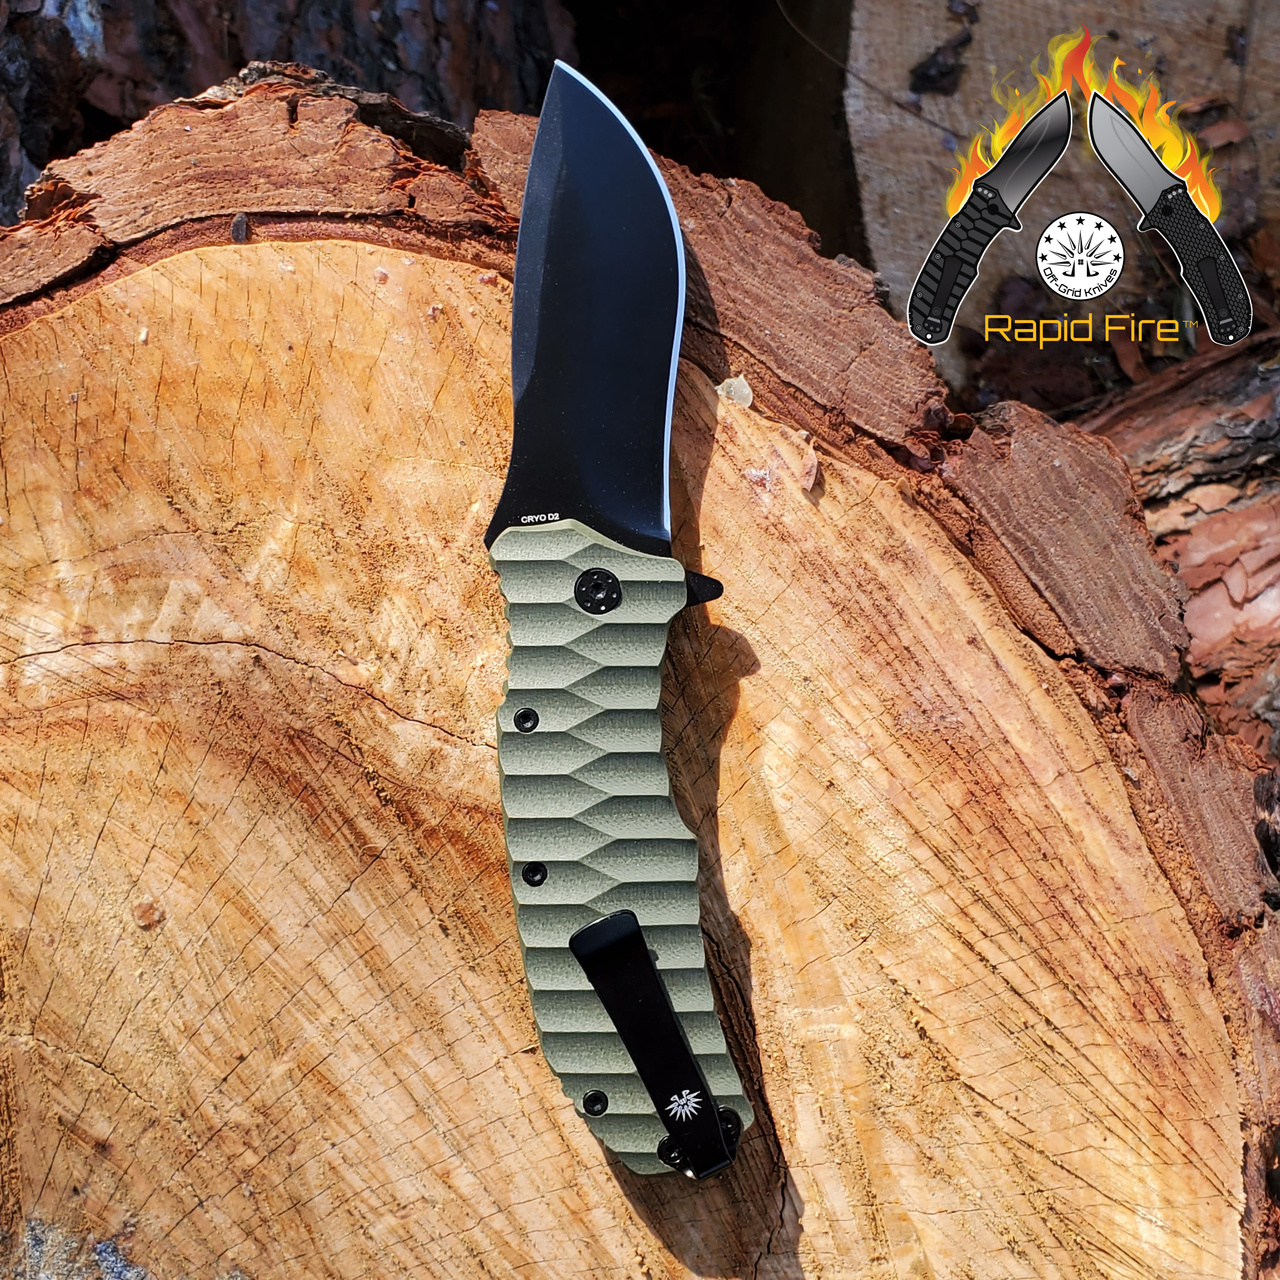 Sharp Knives - Everything You Need To Know - Off-Grid Knives